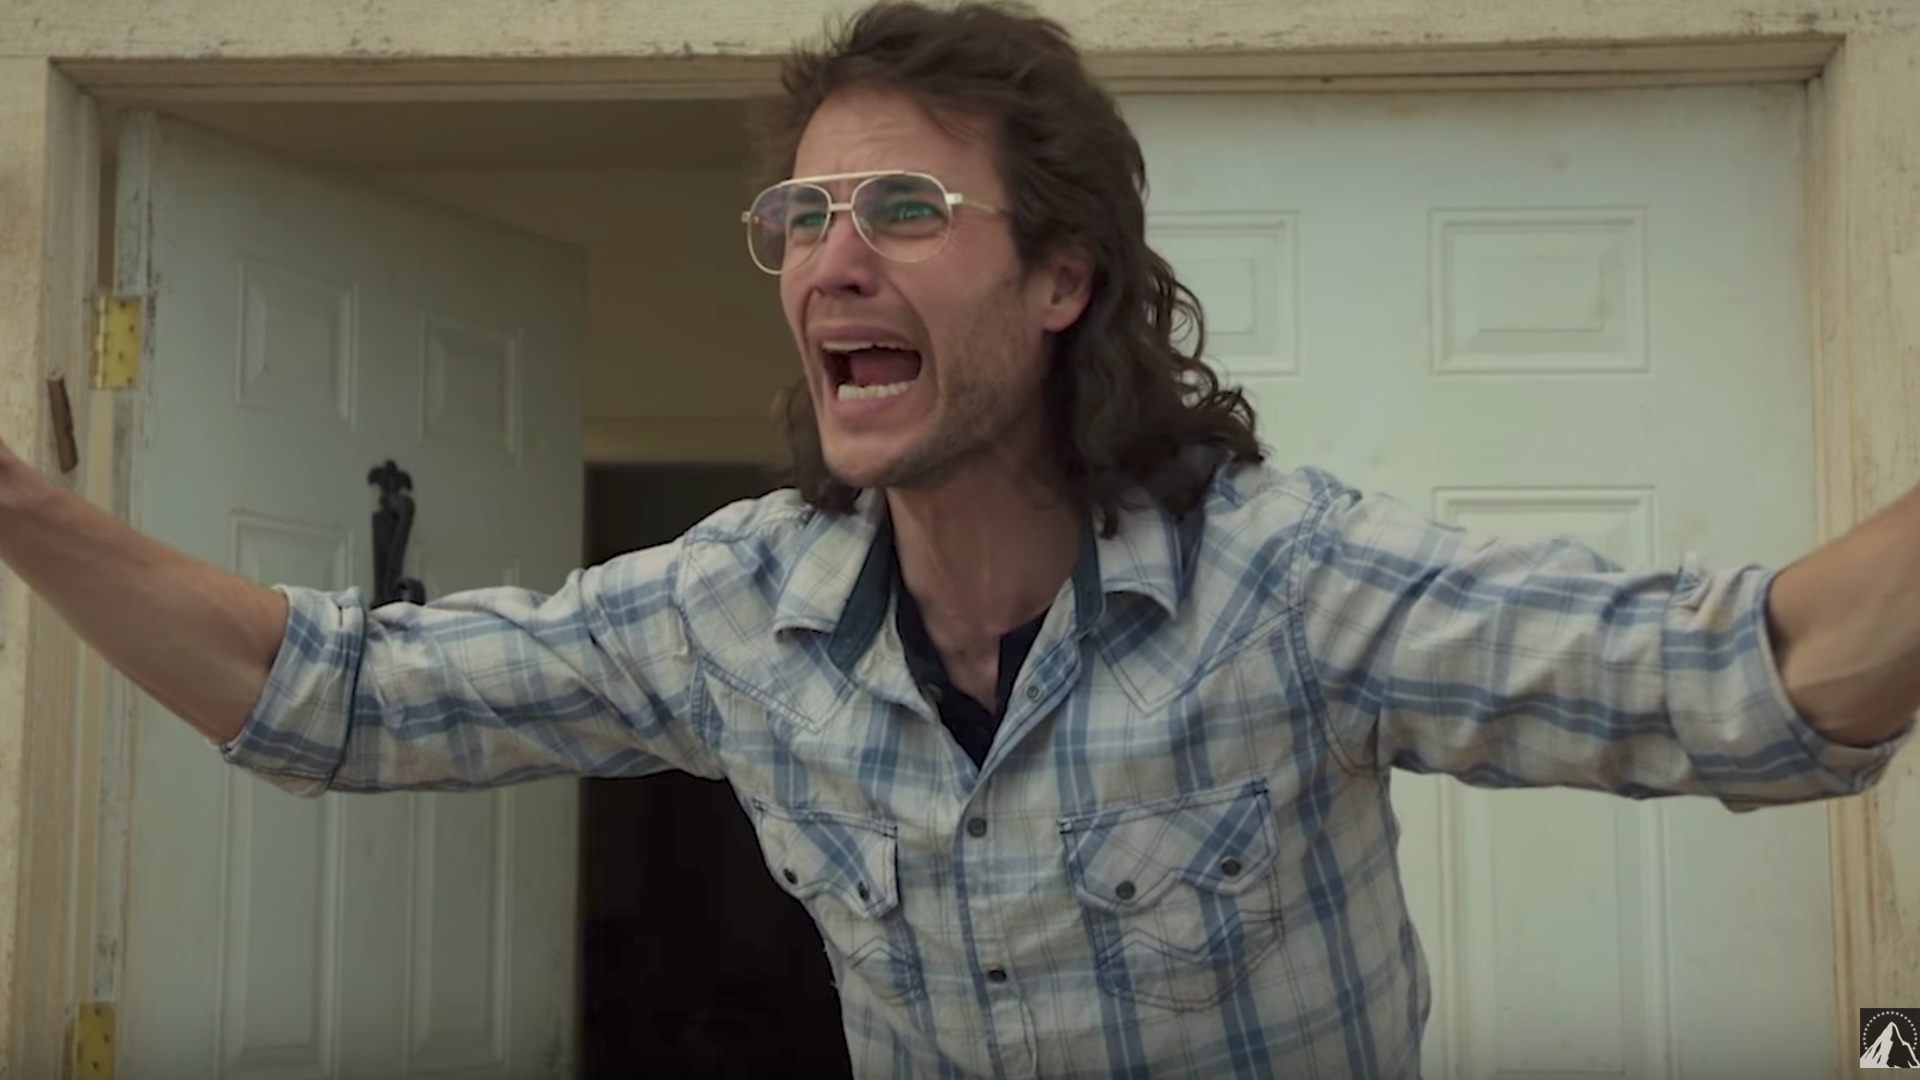 1920x1080 Intense New Trailer for WACO with Taylor Kitsch and Michael Shannon &acirc;&#128;&#148; GeekTyrant